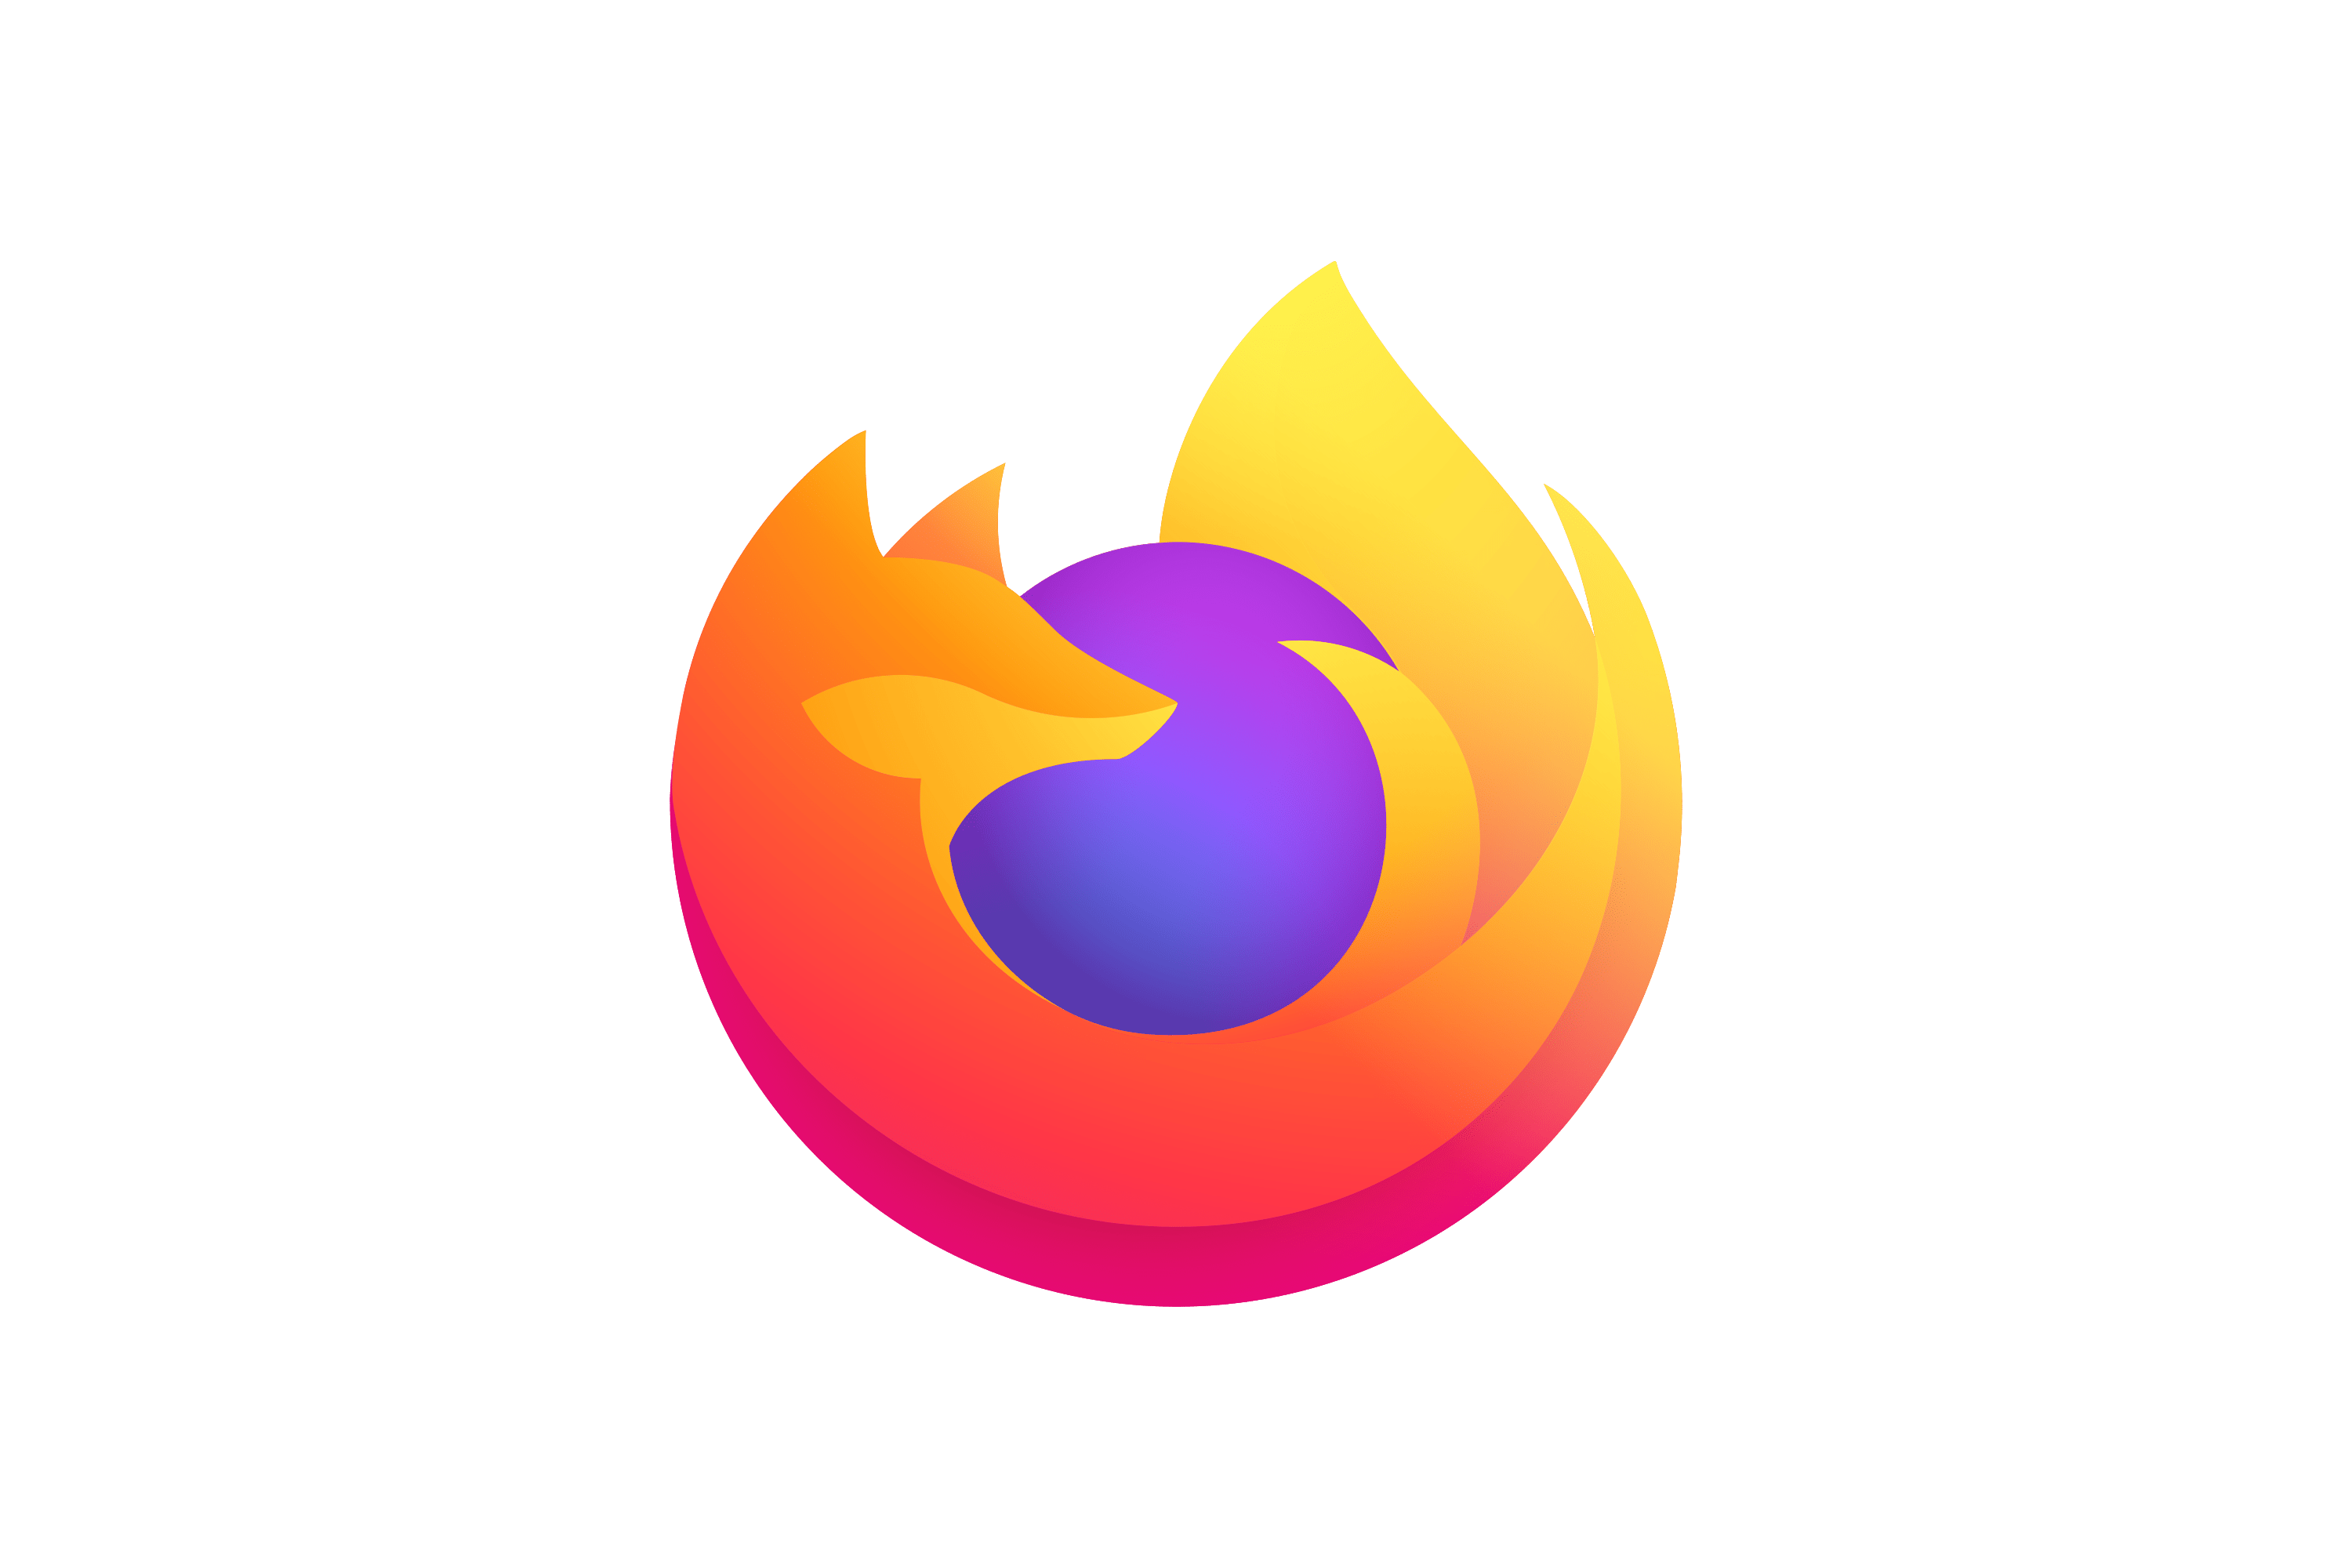 firefox android